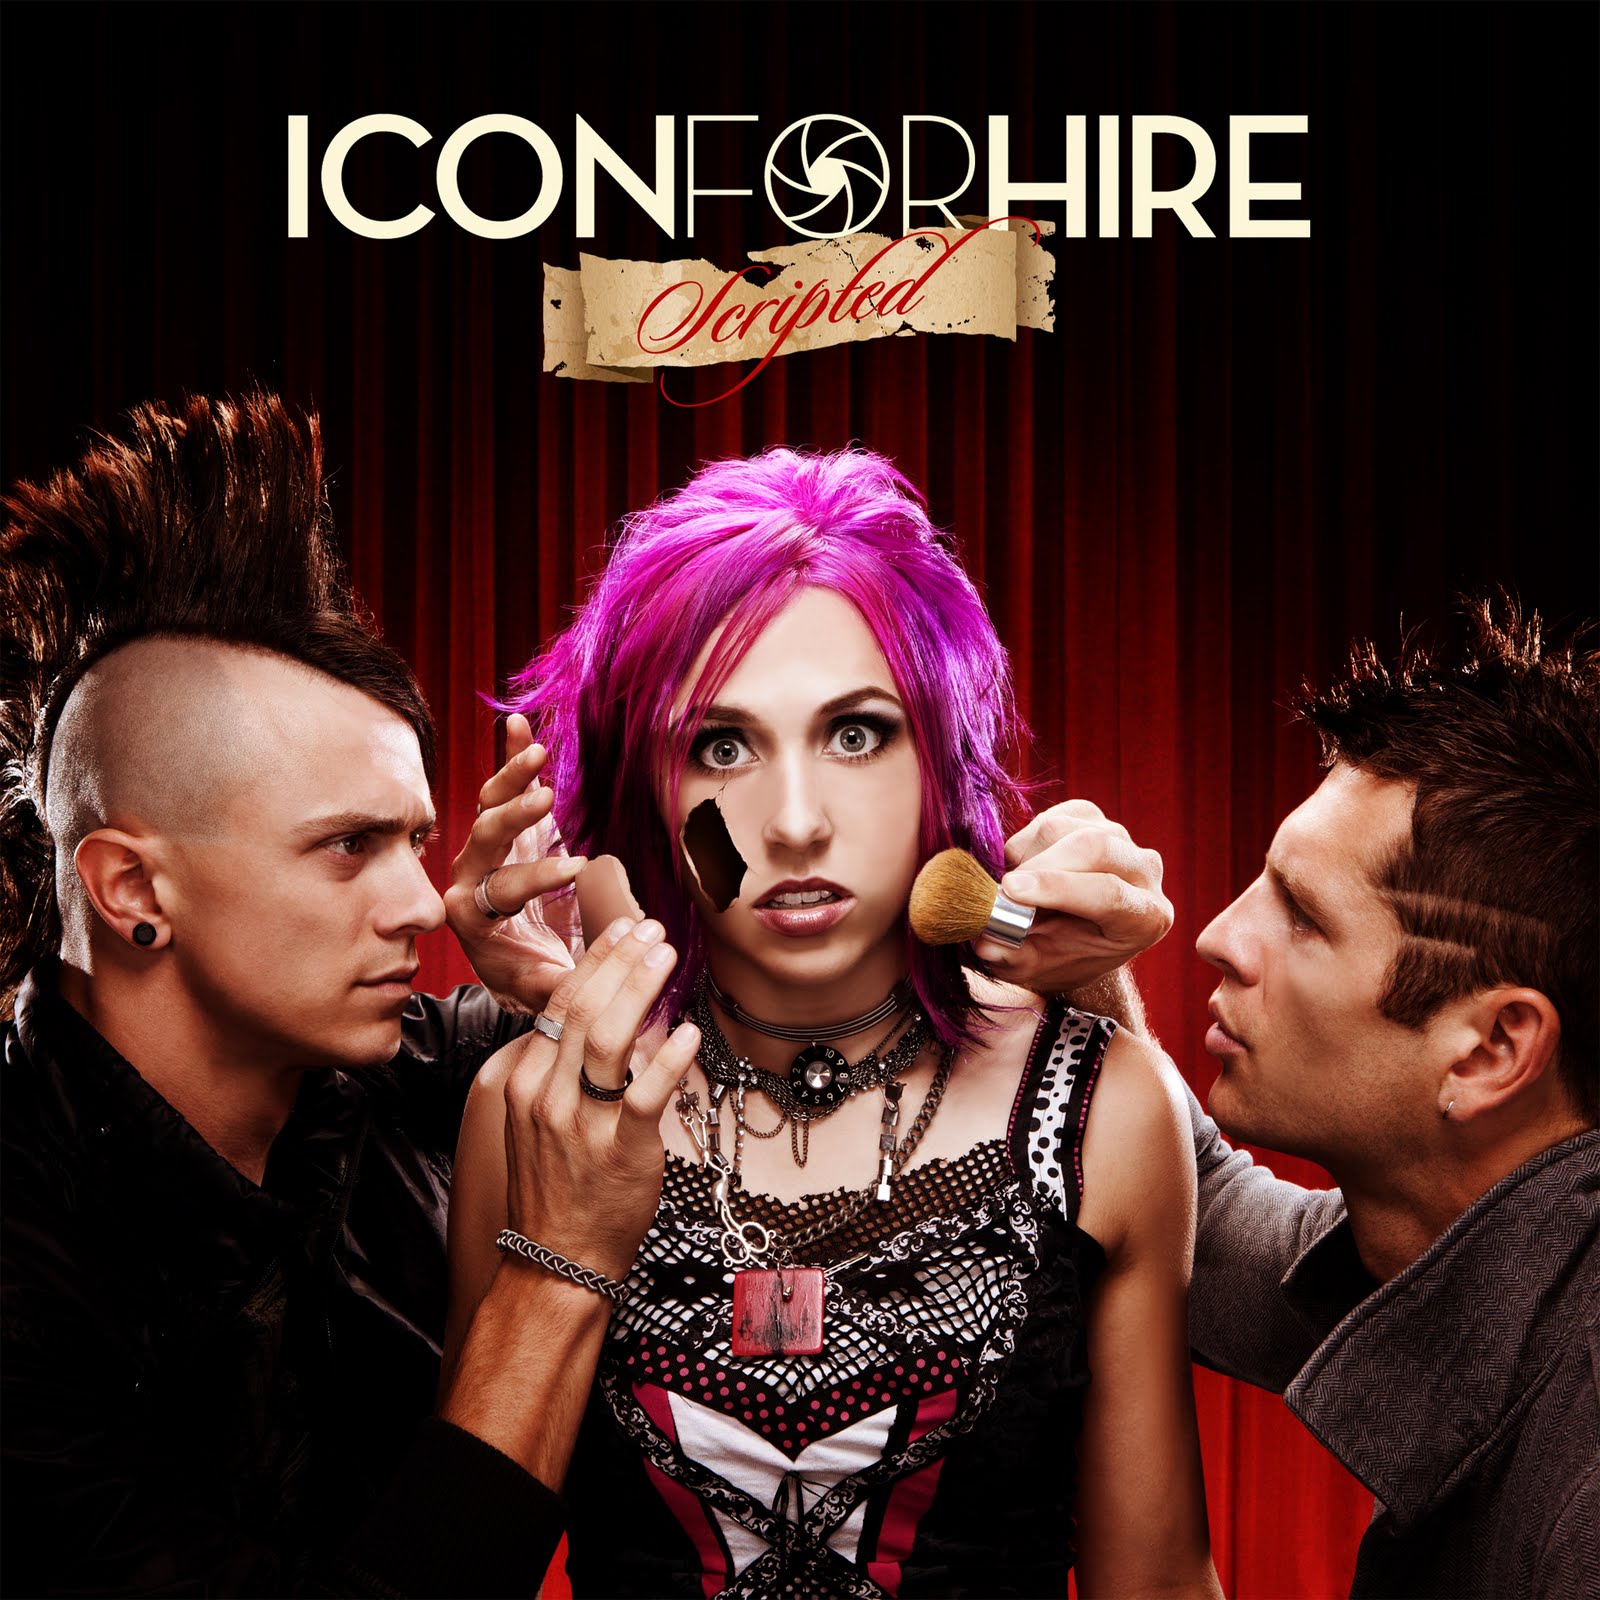 icon for hire scripted 2011.jpg